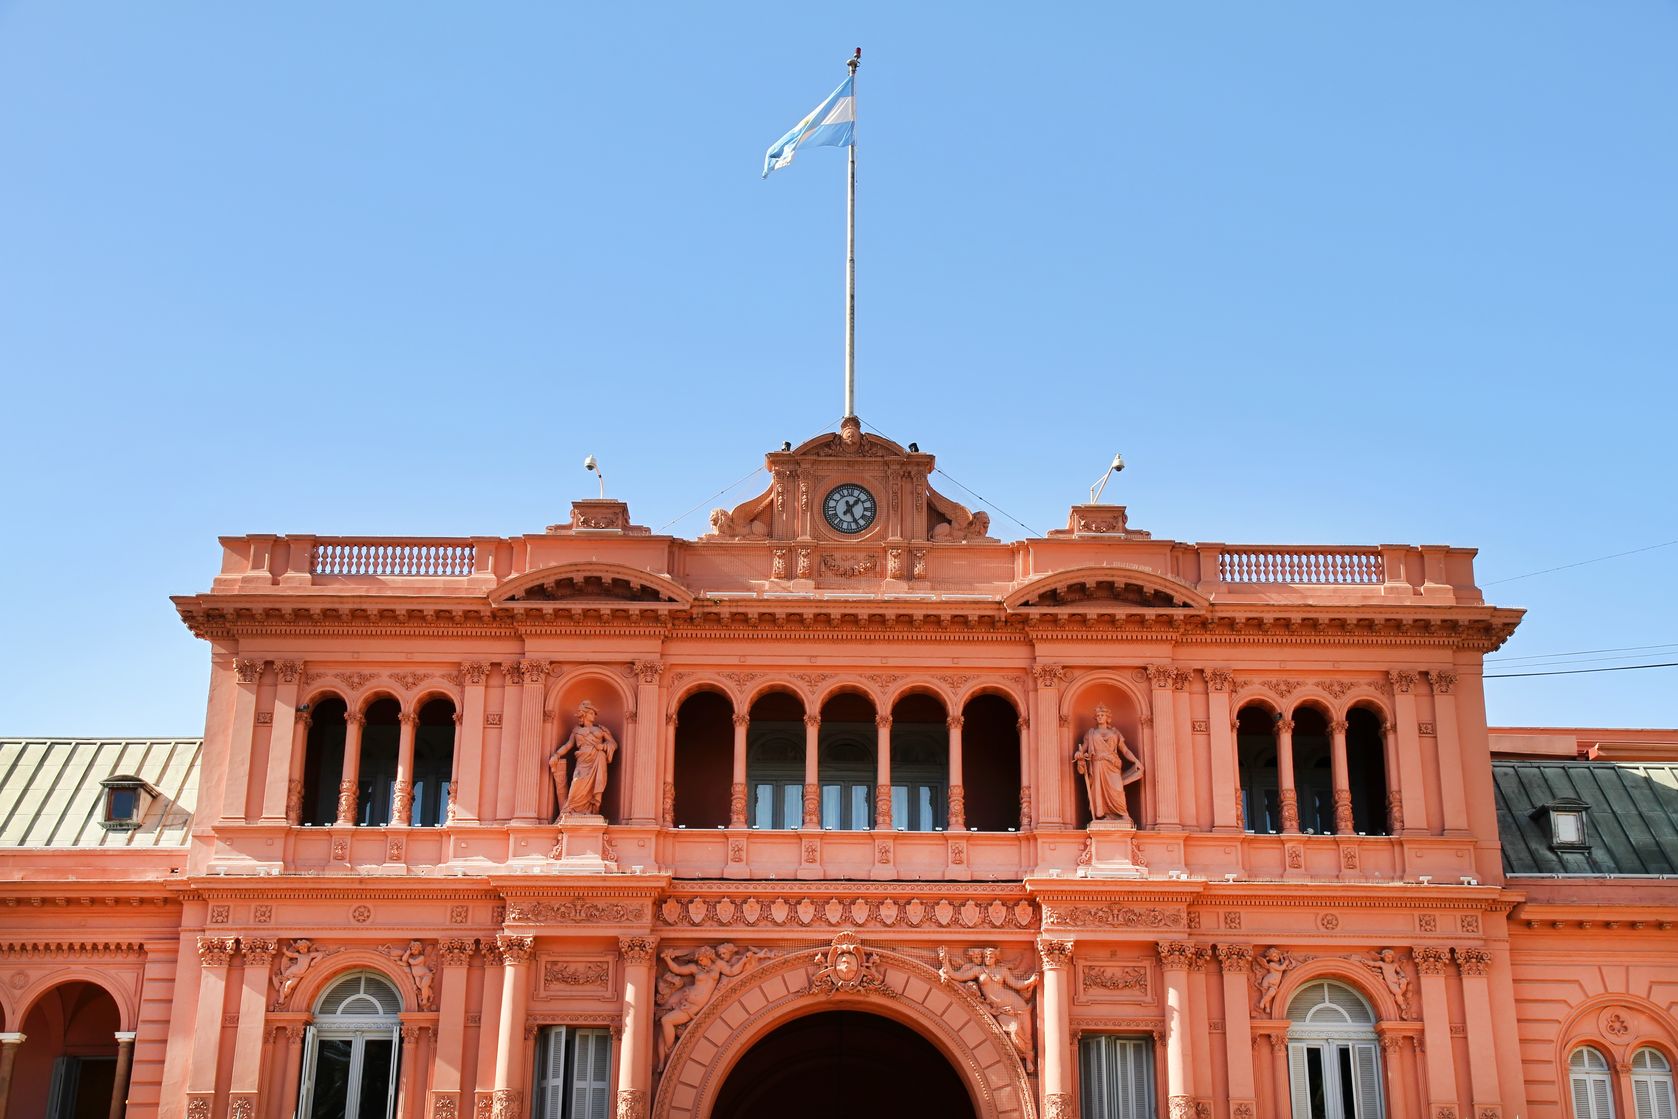 The Casa Rosada, the governmental building in Buenos Aires, the Capital of Argentina.